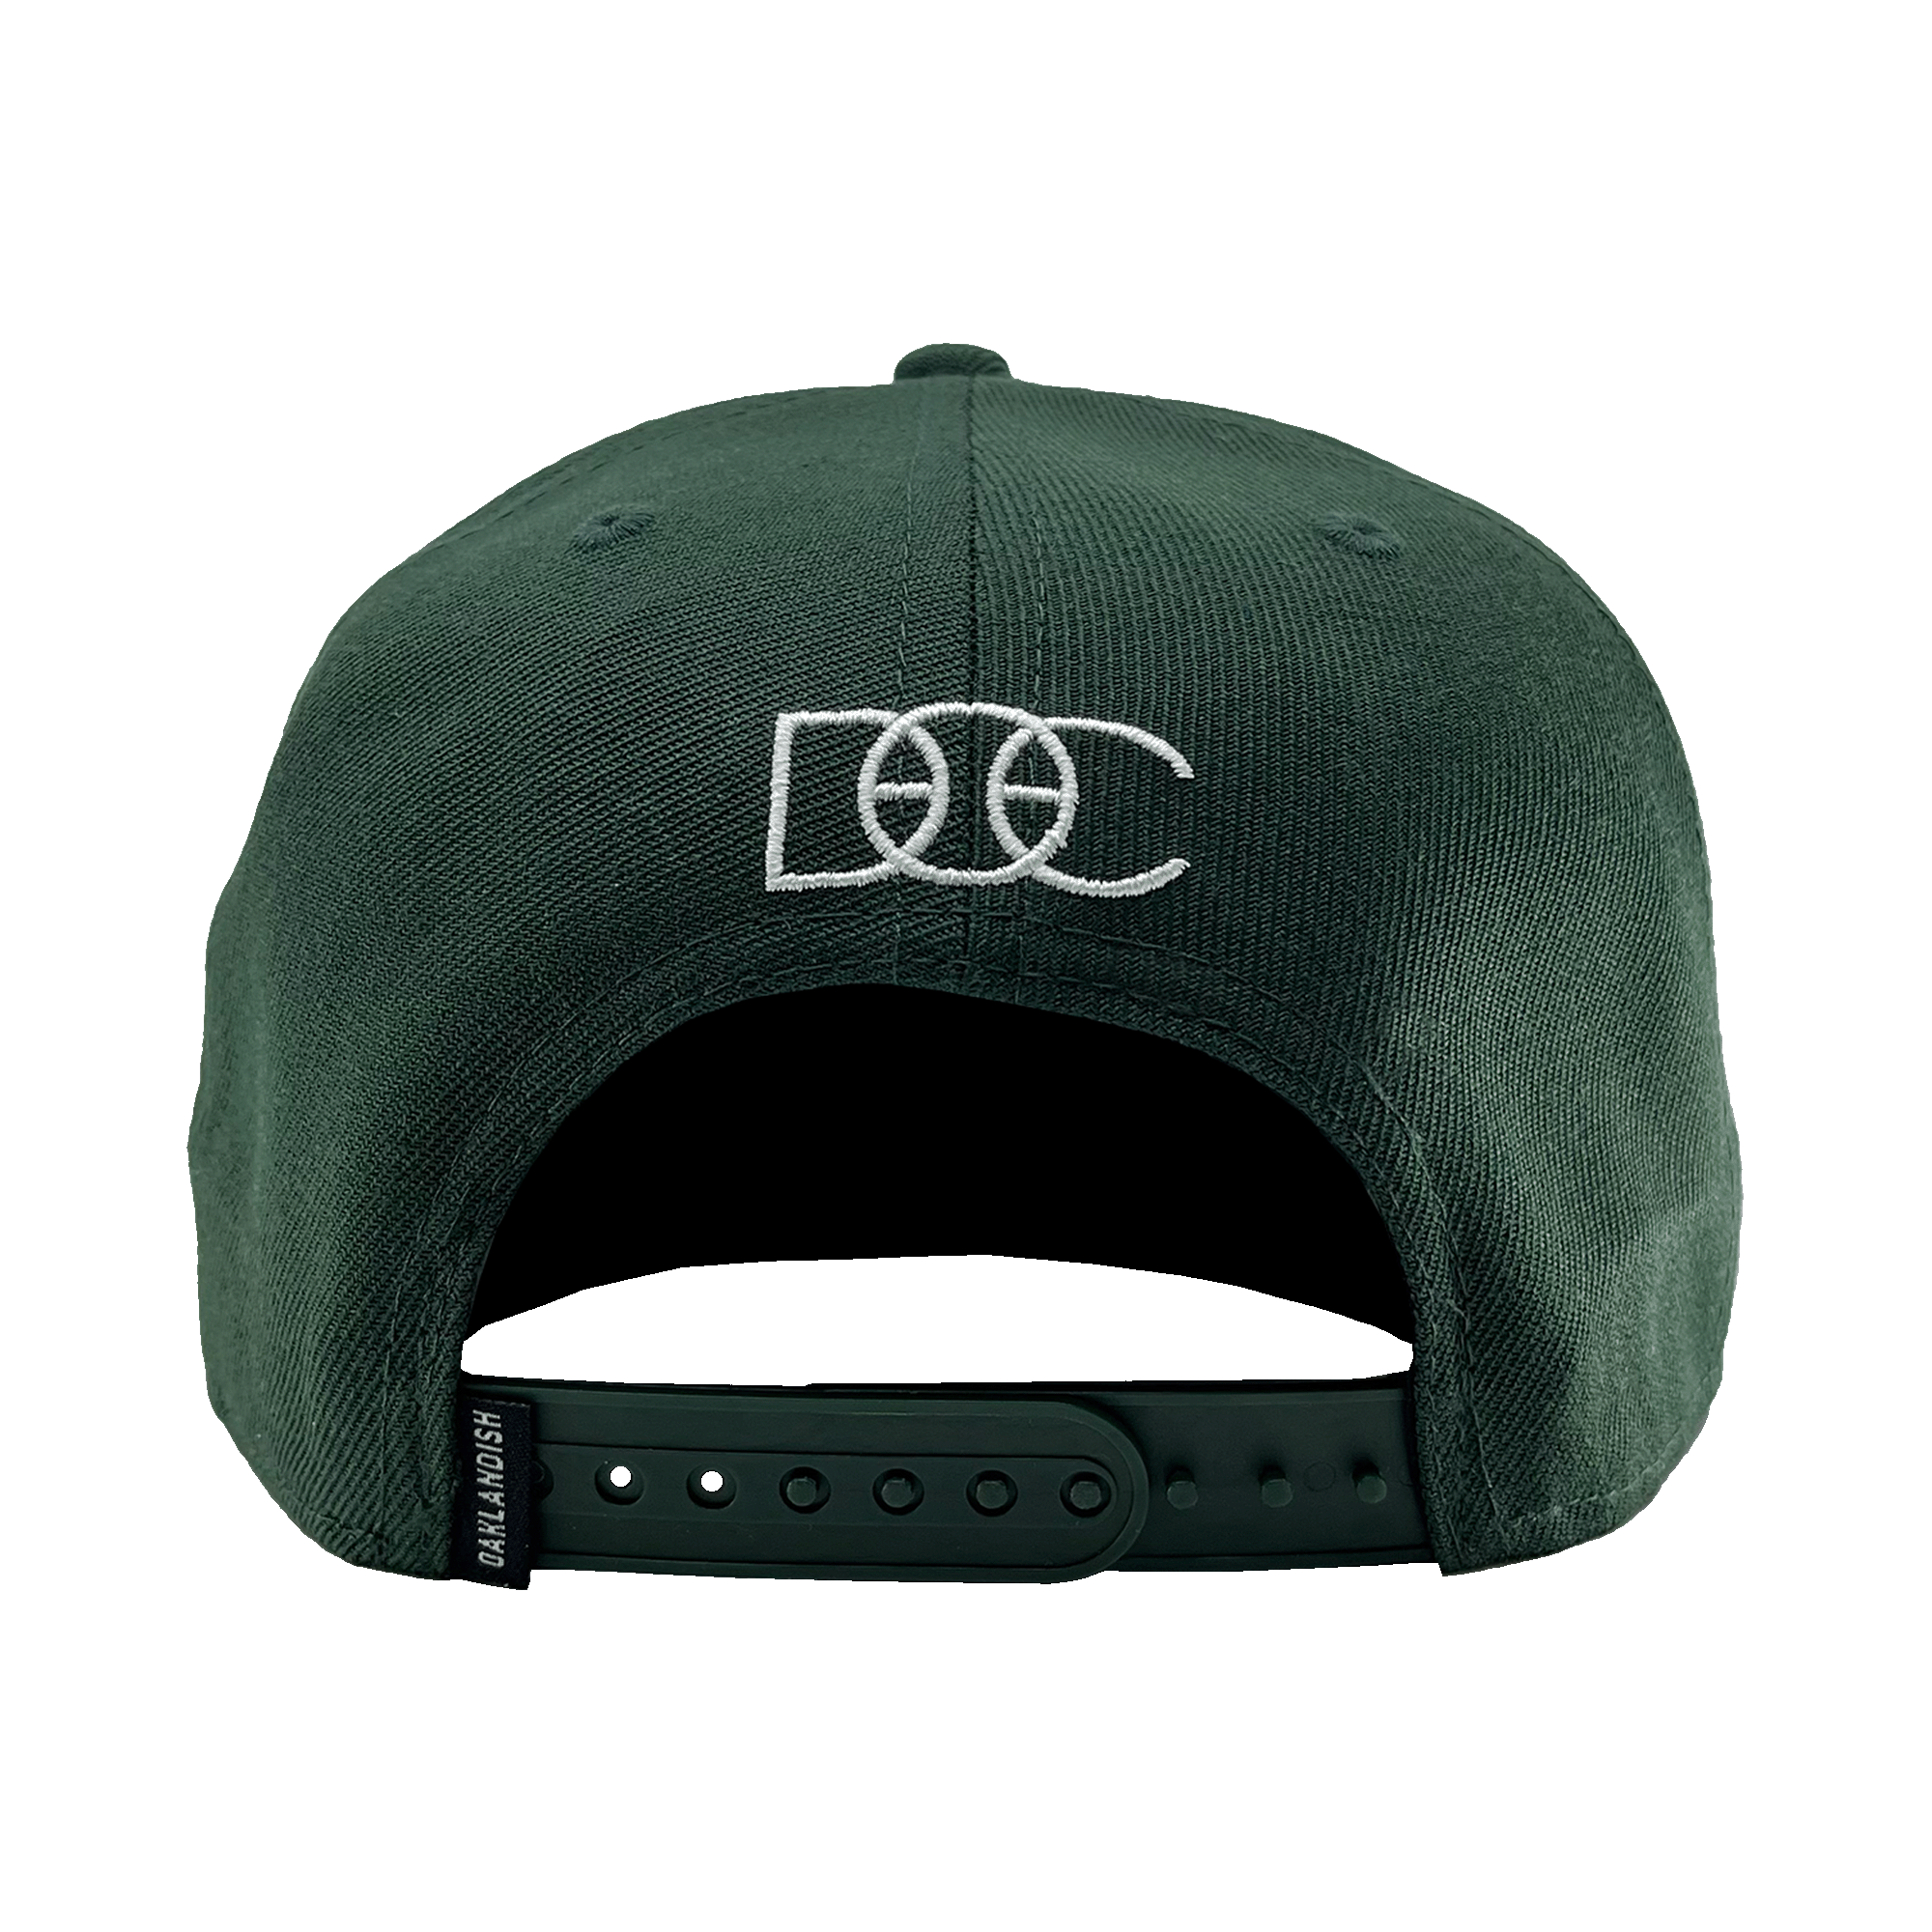 Back view of a green hat with a green snapback closure, a small Oaklandish tag, and a white embroidered DOC wordmark. 